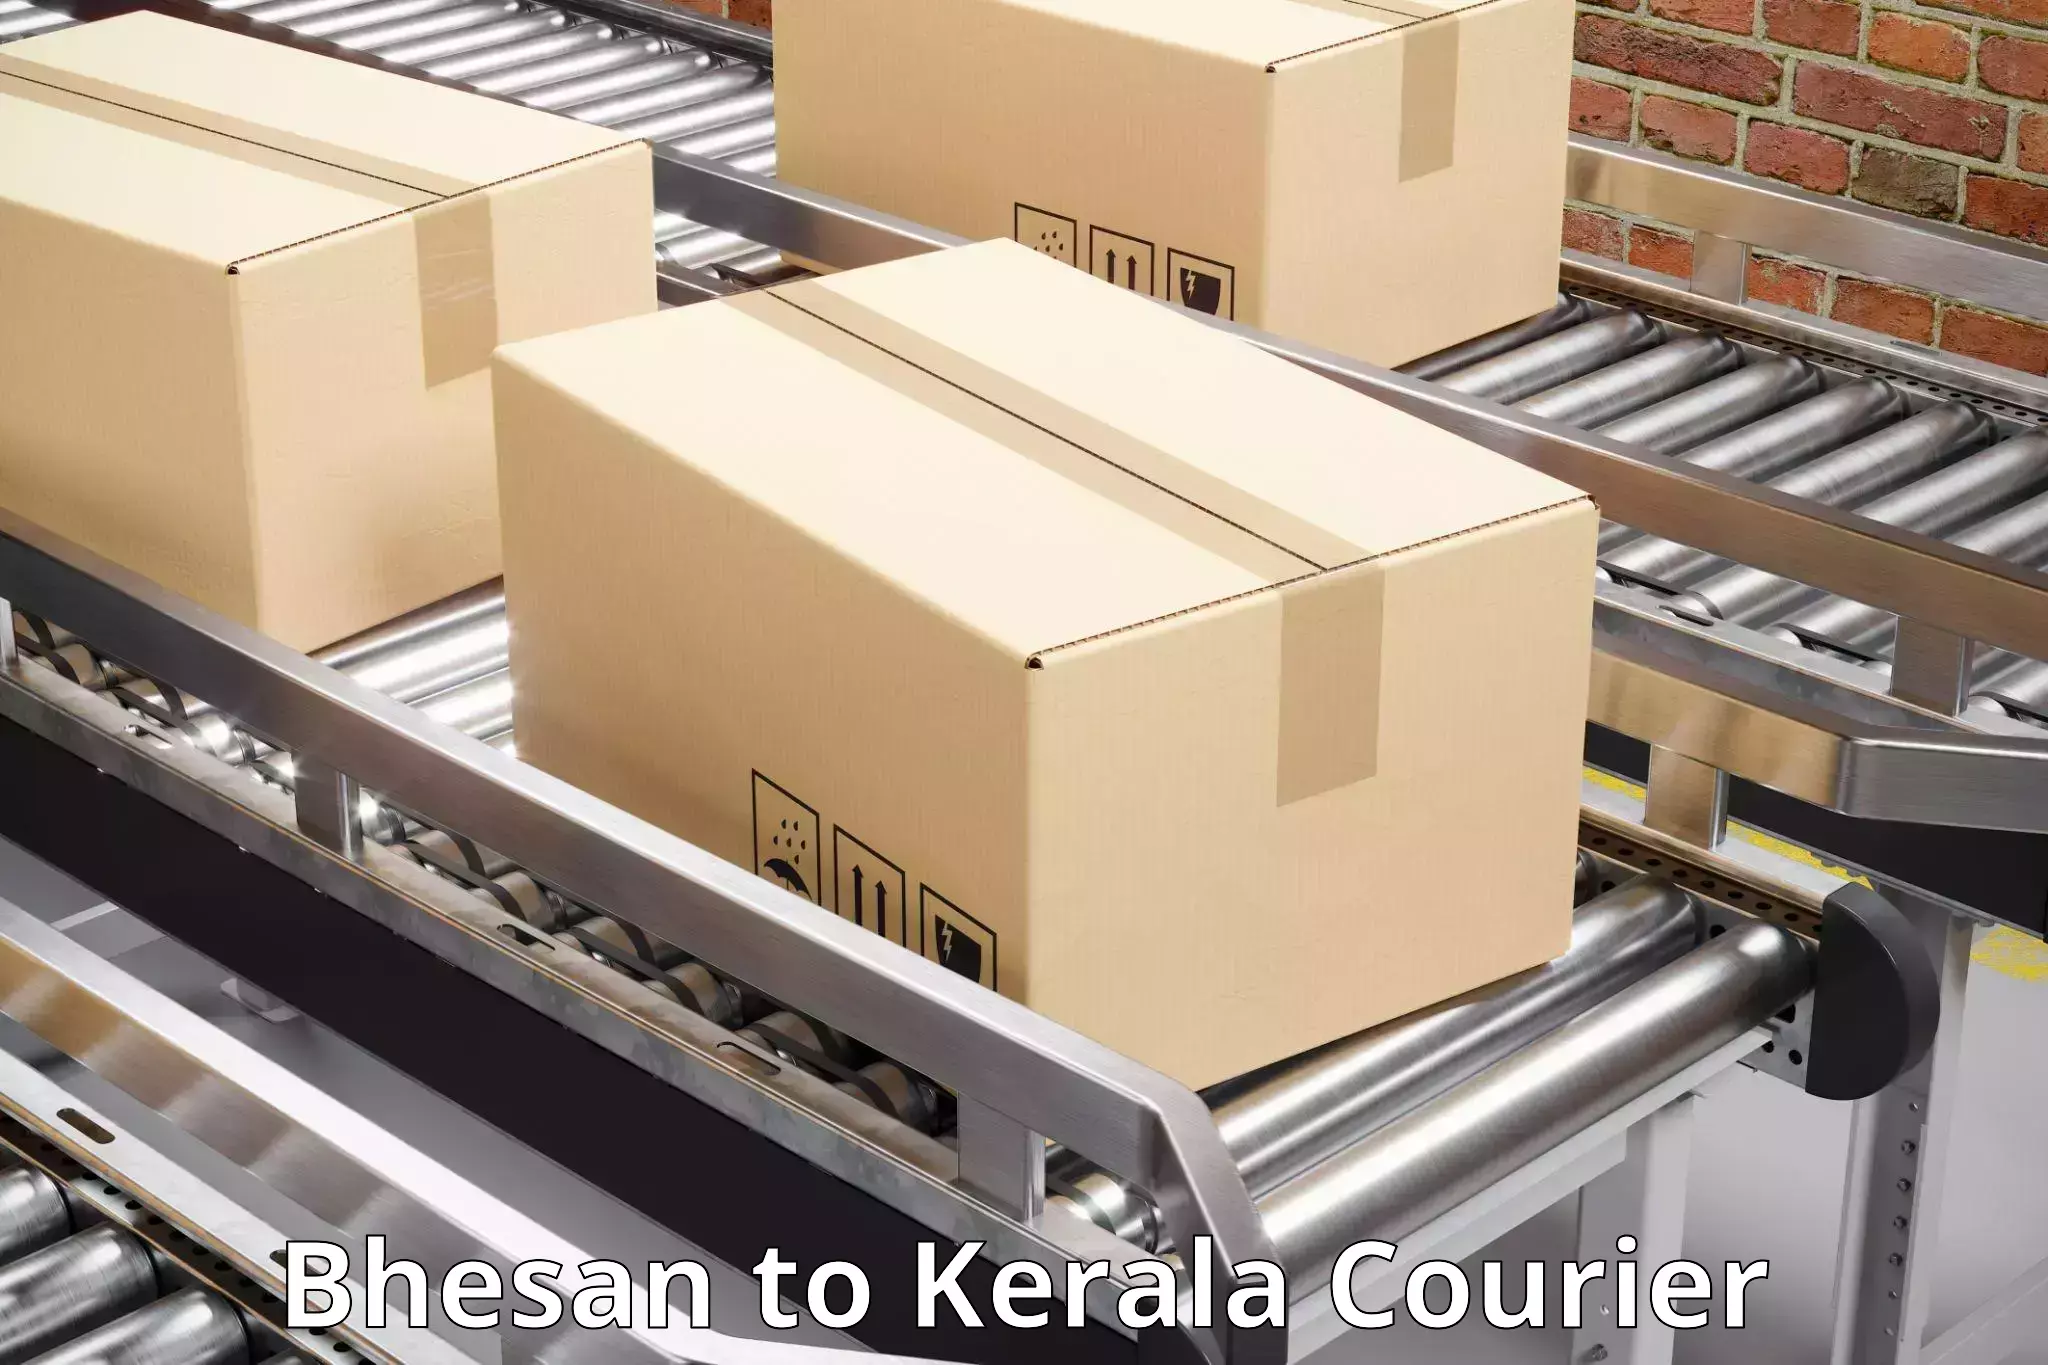 Same-day delivery options Bhesan to Munnar